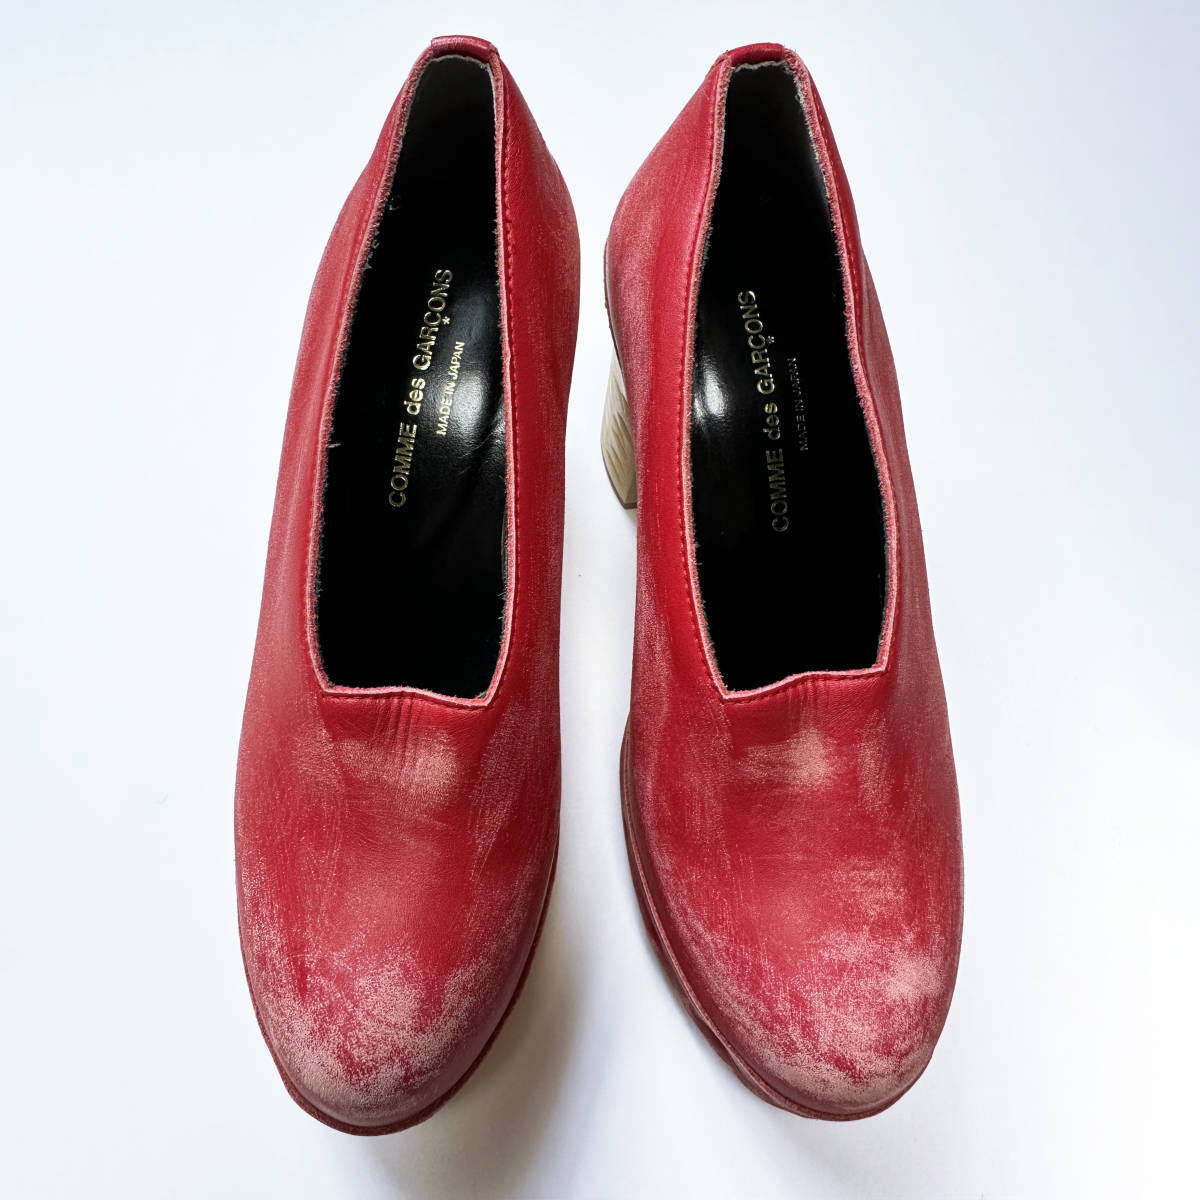 12AW 二次元 製品加工 レザー シューズ ハイヒール COMME des GARCONS 2012AW 2012 2次元 Garment Finish High Heeled Leather Shoes_画像、説明文の転載・加工、編集利用禁止。